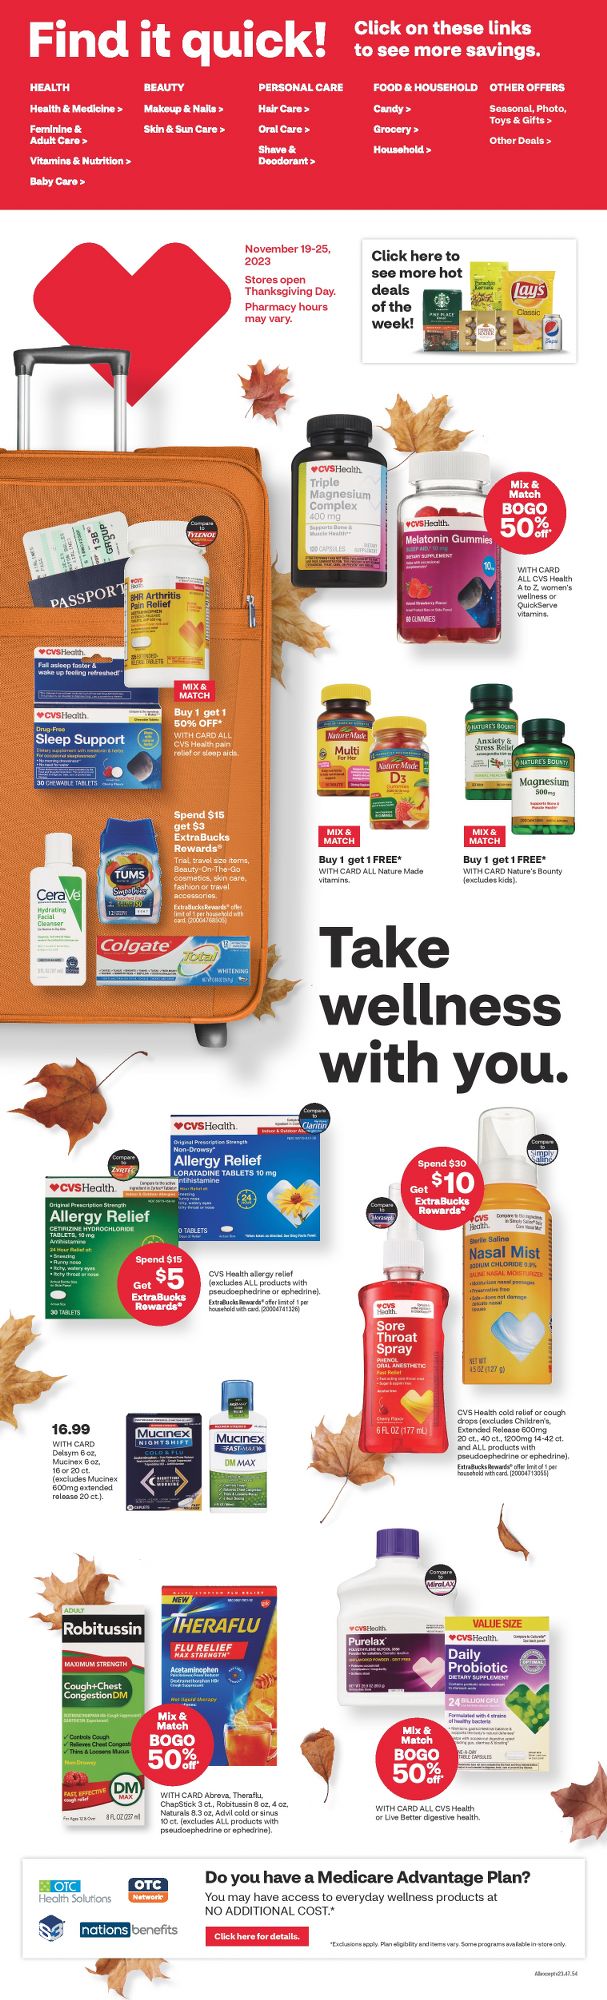 CVS Pharmacy Sales Products and Weekly Deals